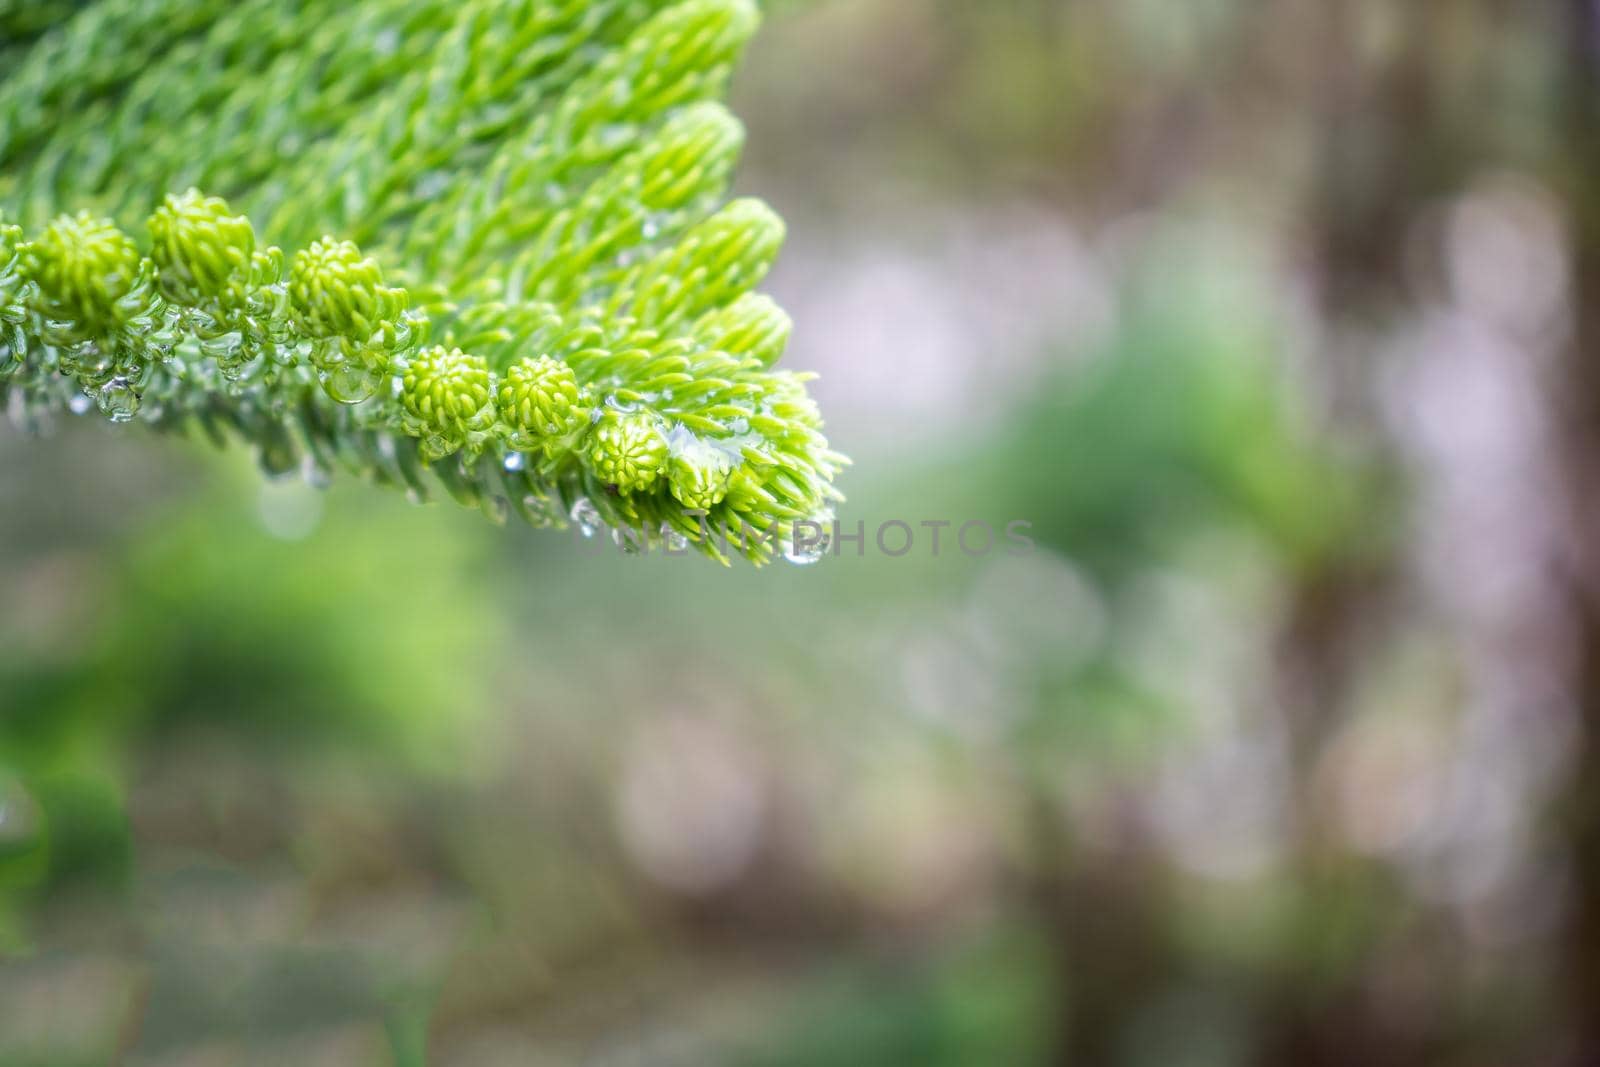 Picture of fresh green leaves and water droplets on the leaves. Focus on the leaves